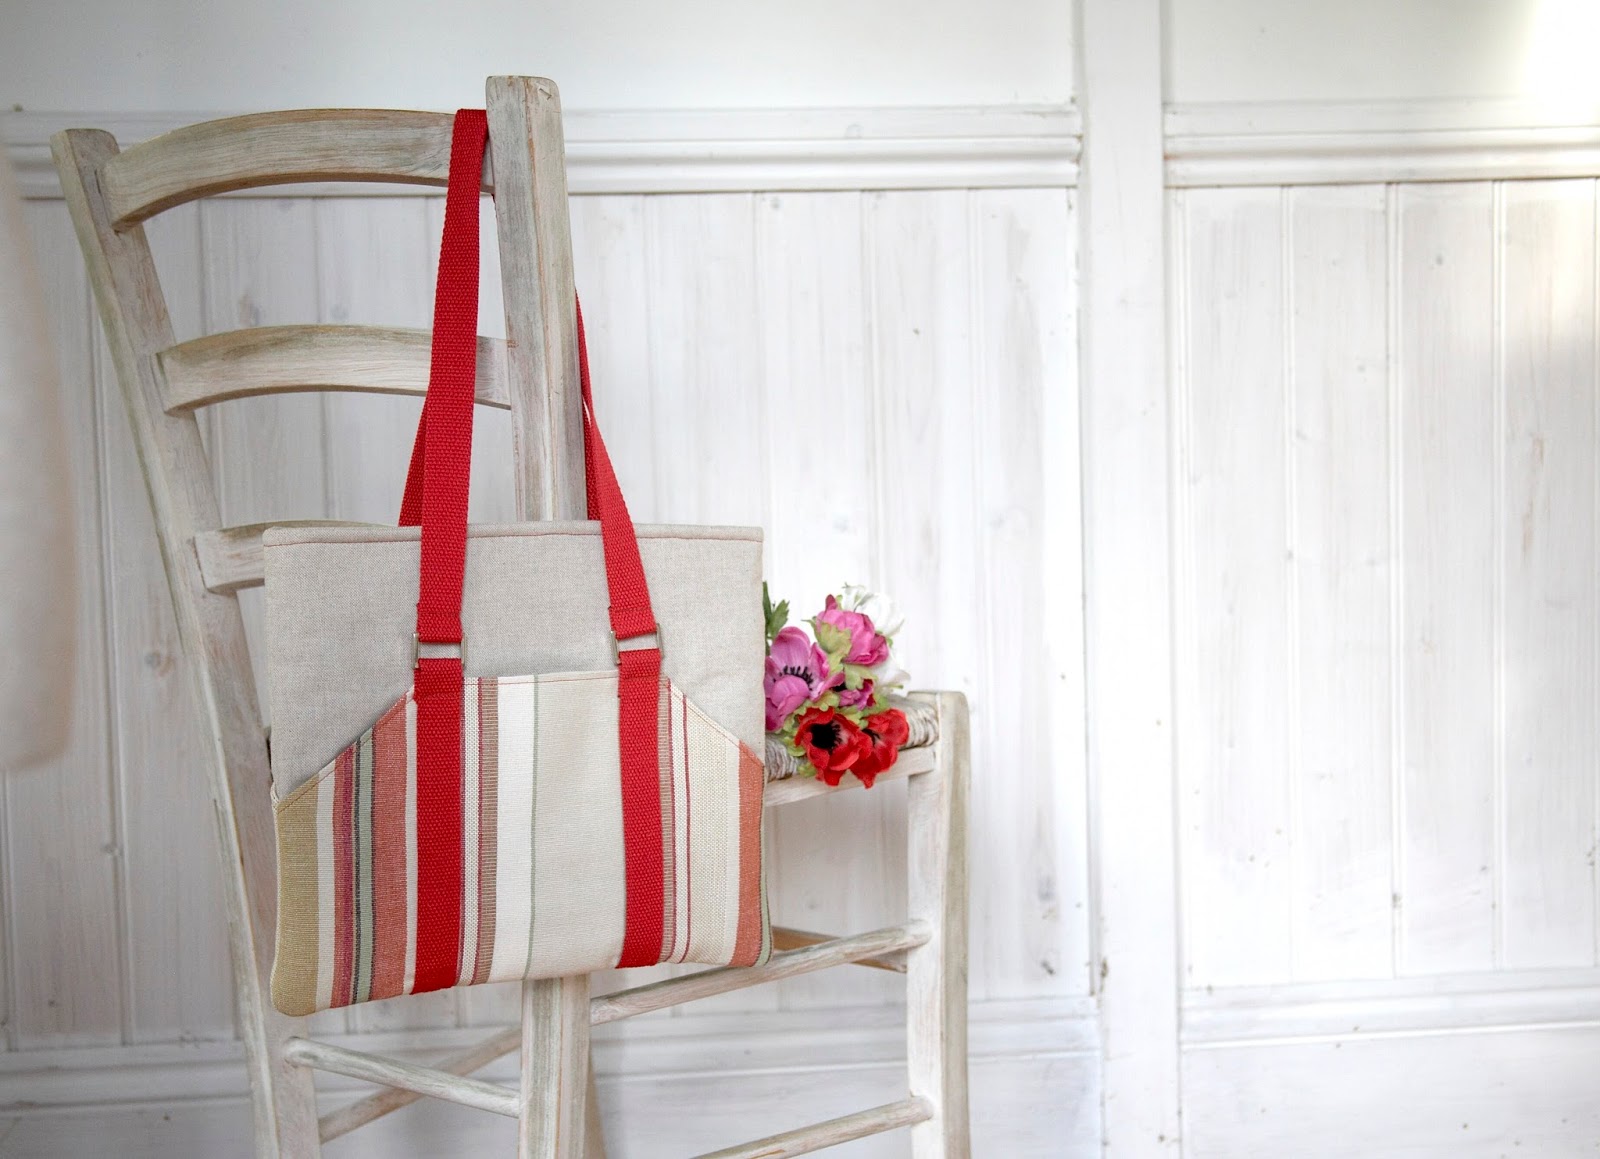 How to Sew a Zipped Tote Bag by Debbie Shore 